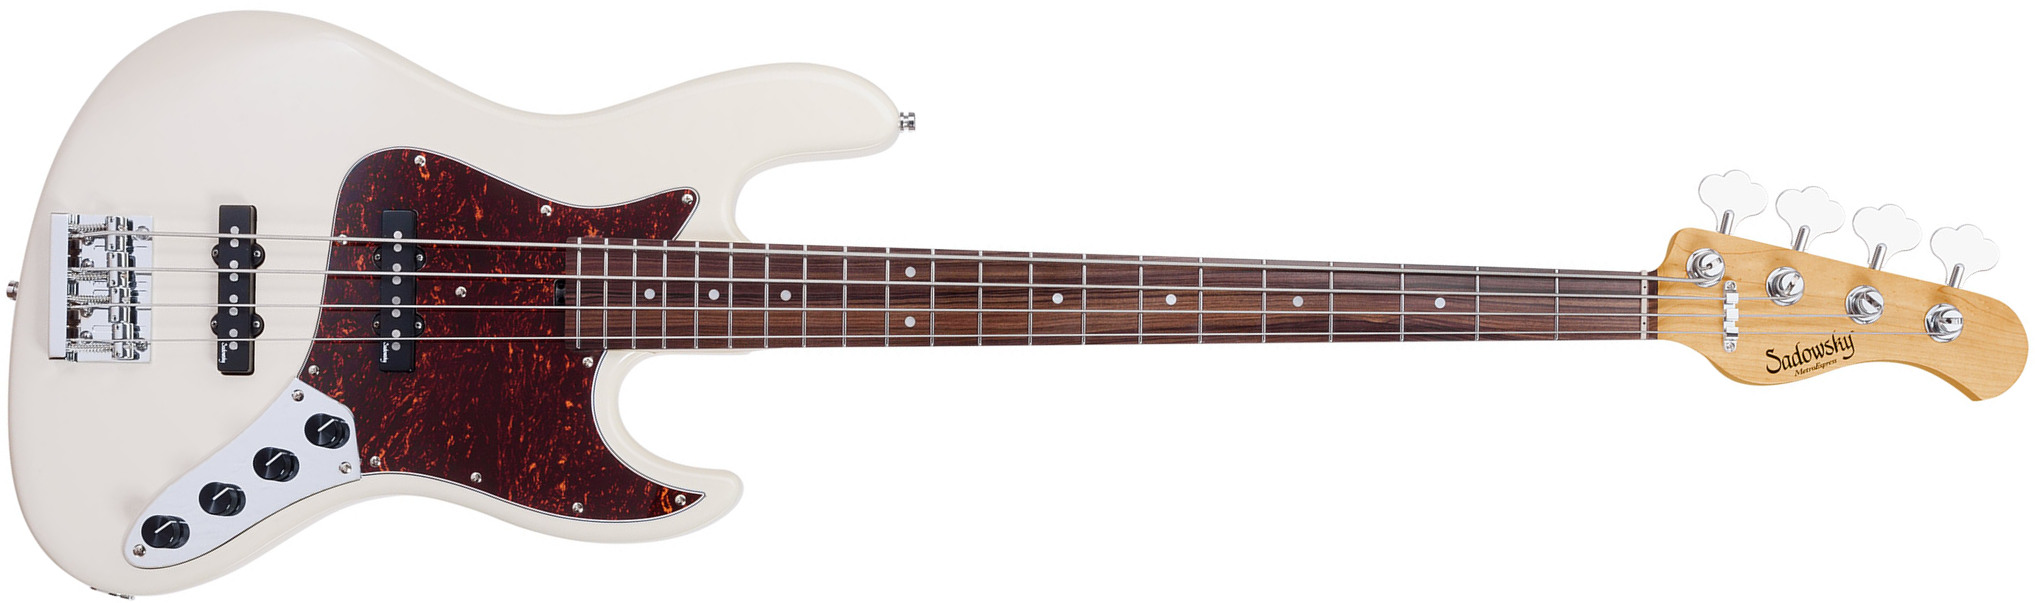 Sadowsky Standard Jj 21 Fret 4c Metroexpress V2 Mor - Olympic White - Solid body electric bass - Main picture